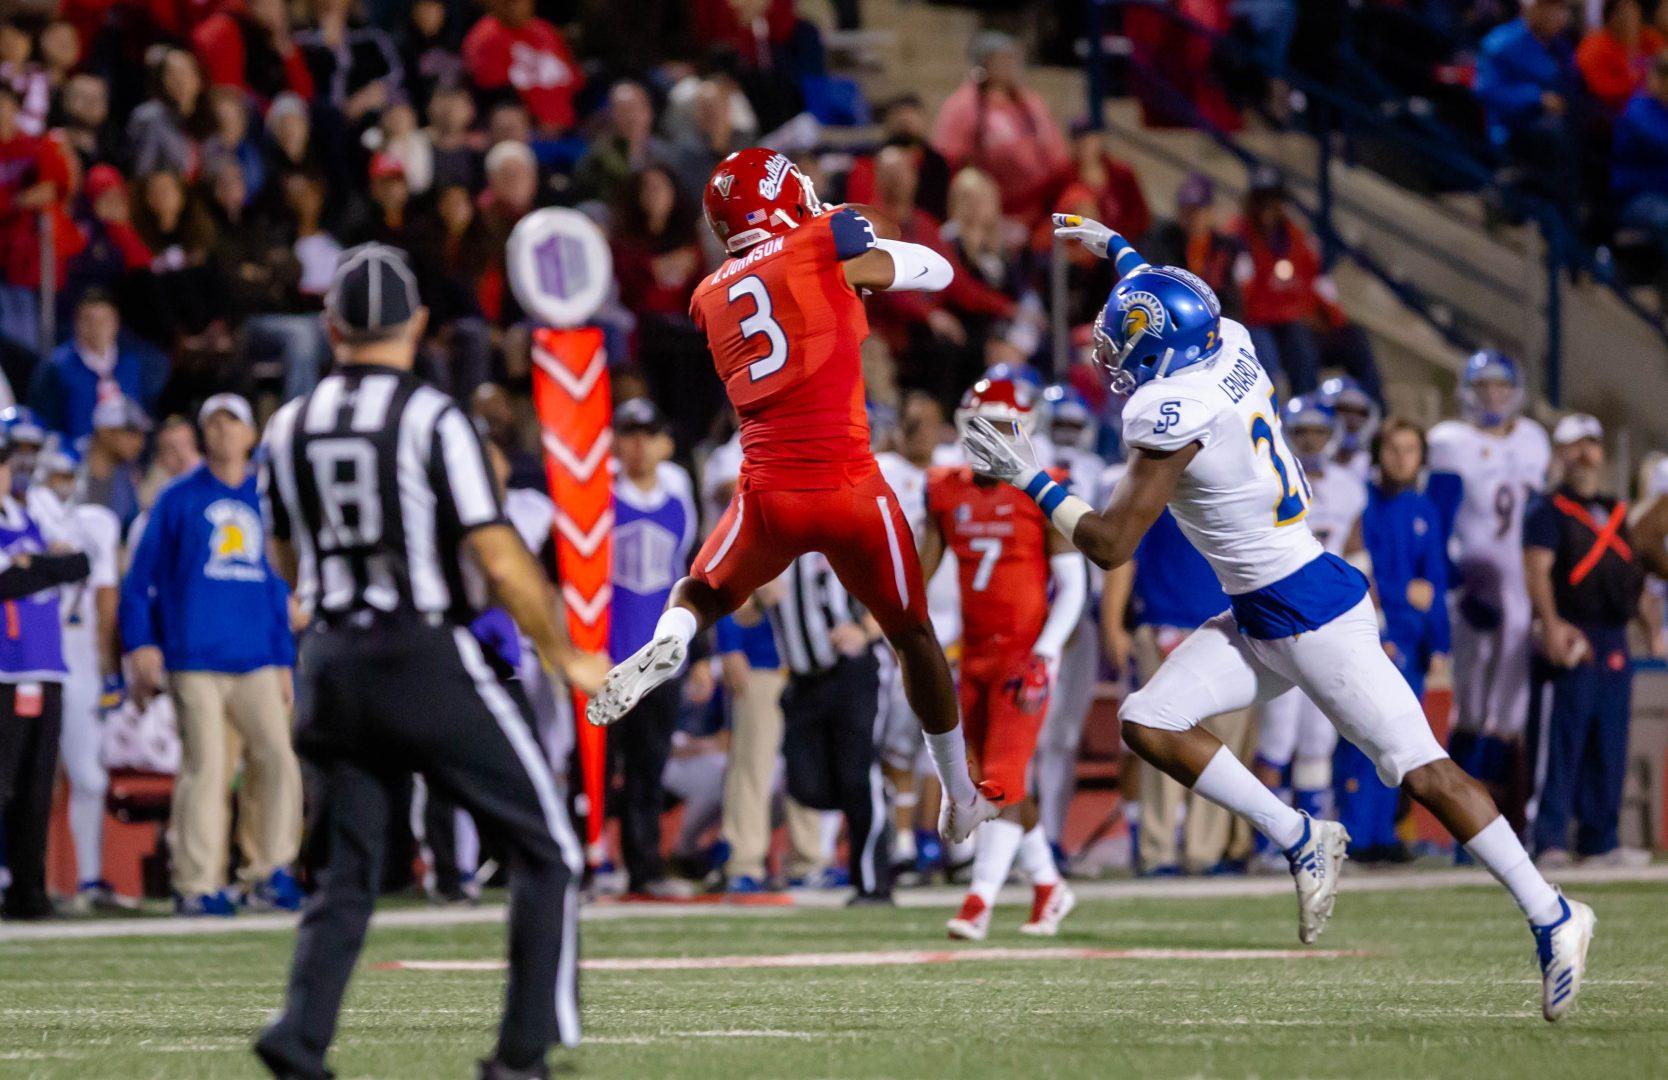 Fresno State senior wide receiver Keesean Johnson catches a pass in the Bulldogs’ 31-13 victory over San Jose State on Nov. 24, 2018(Jose Romo/ The Collegian)